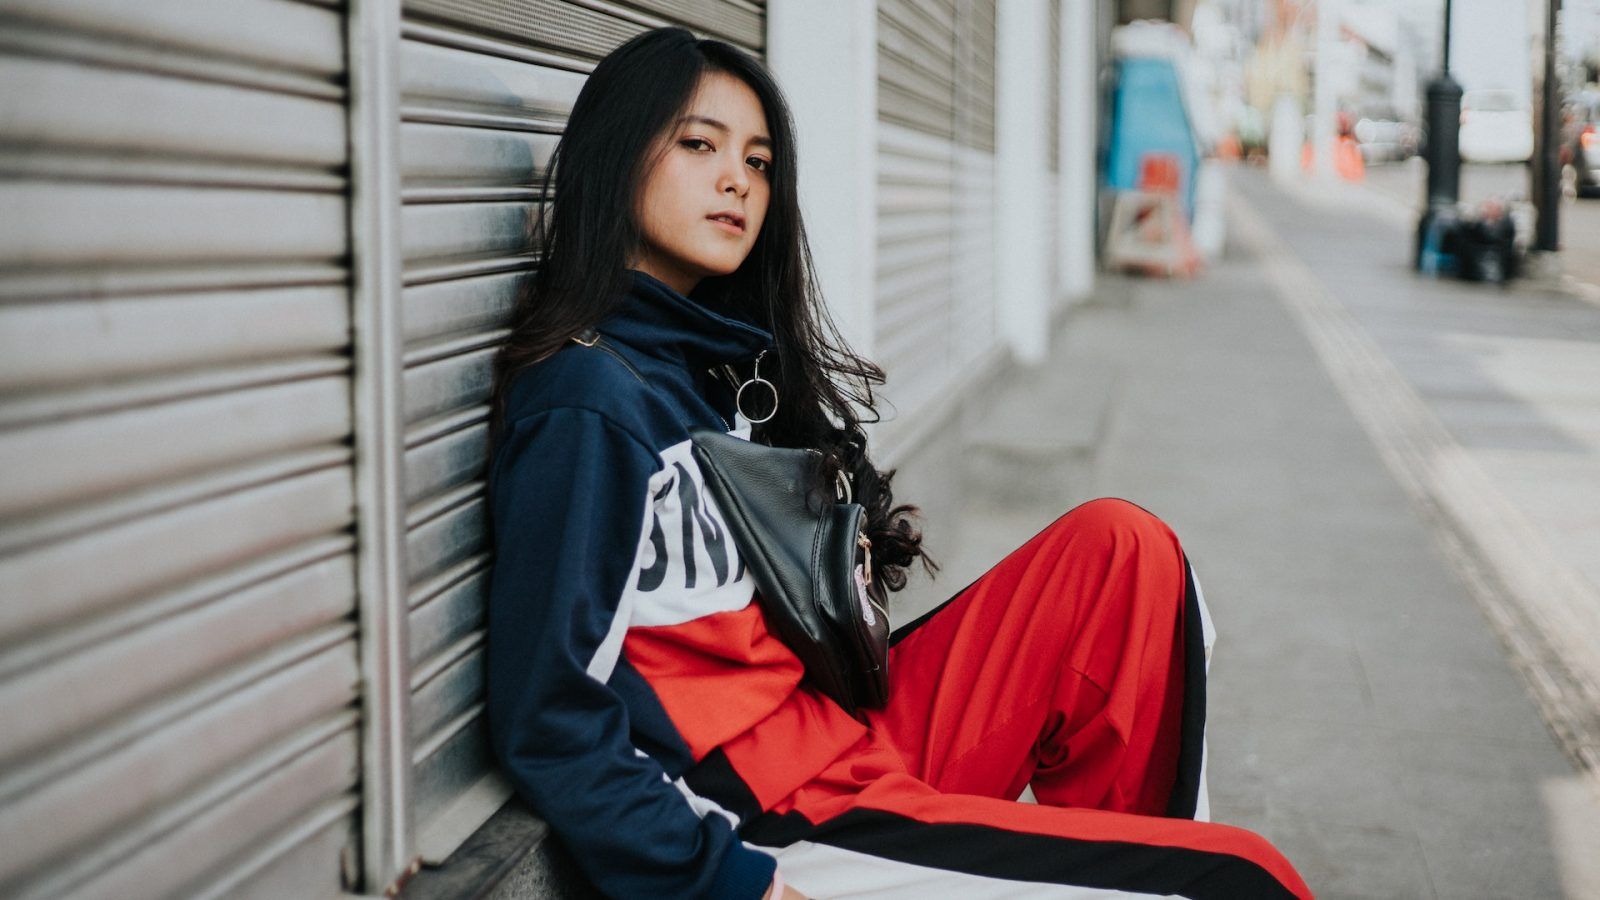 https://images.lifestyleasia.com/wp-content/uploads/sites/2/2023/02/28205102/chinese-streetwear-1600x900.jpg